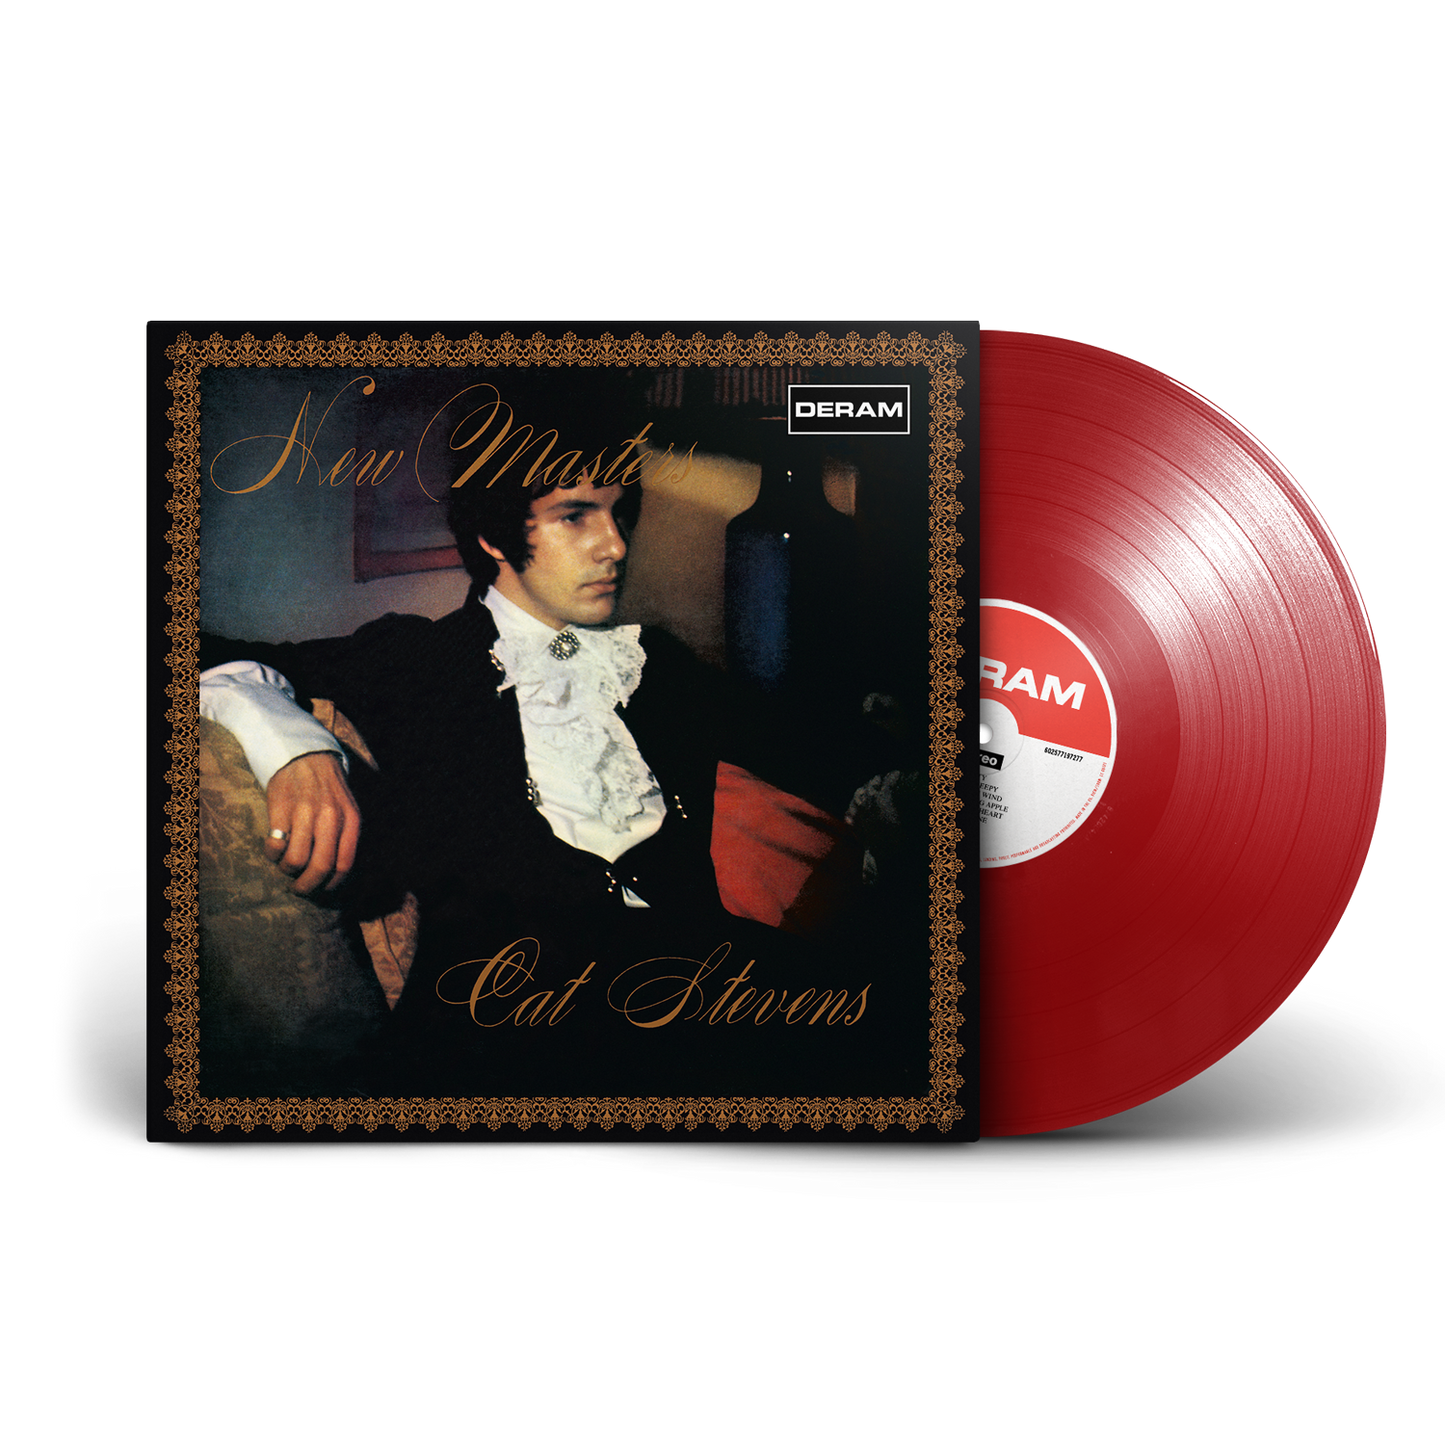 PRE-ORDER New Masters Red Vinyl Edition